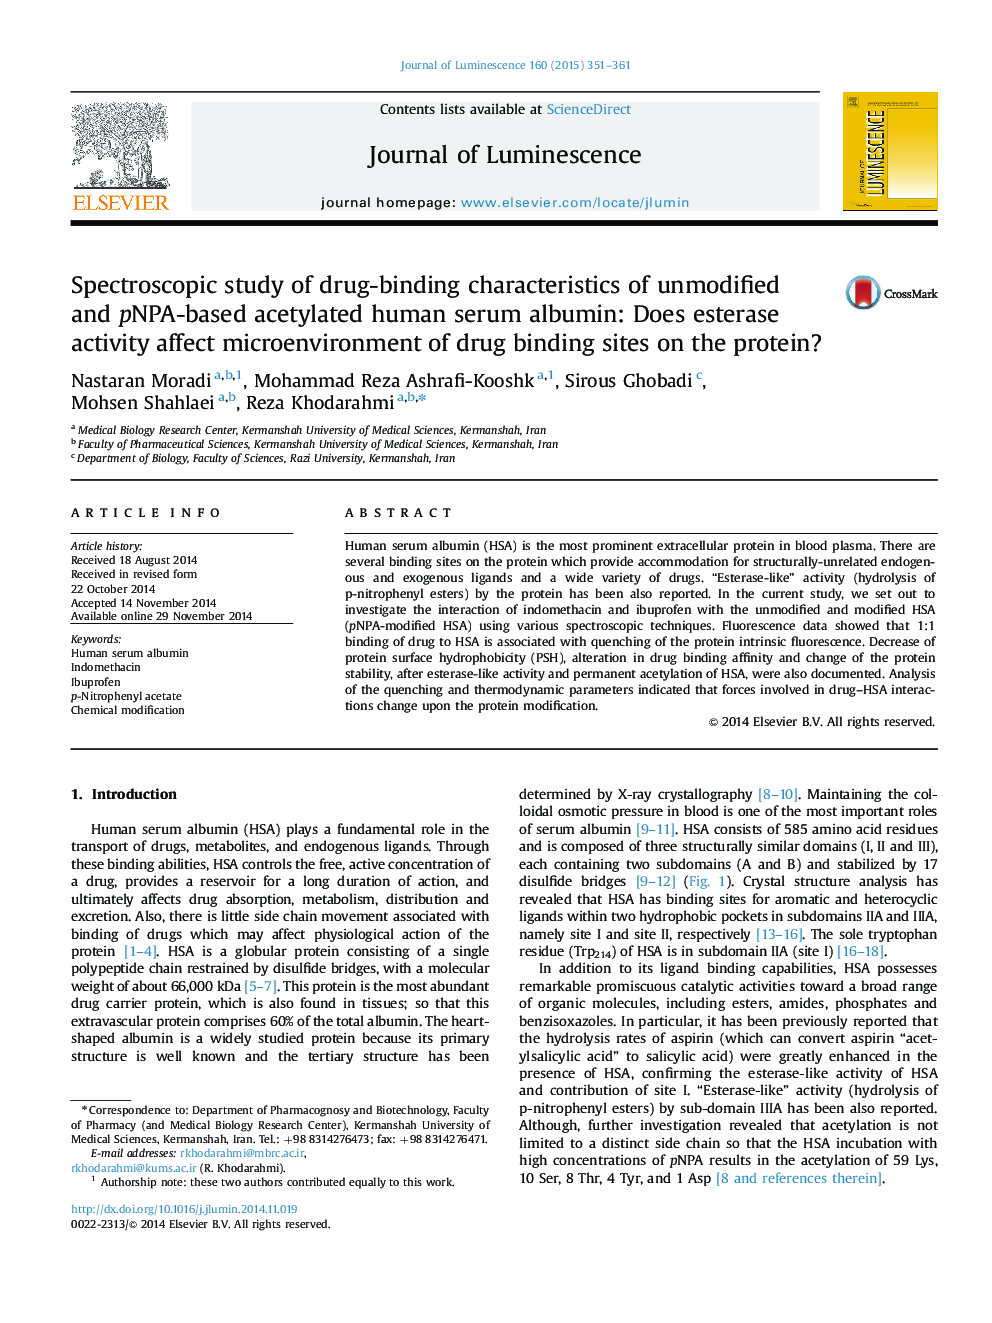 Spectroscopic study of drug-binding characteristics of unmodified and pNPA-based acetylated human serum albumin: Does esterase activity affect microenvironment of drug binding sites on the protein?